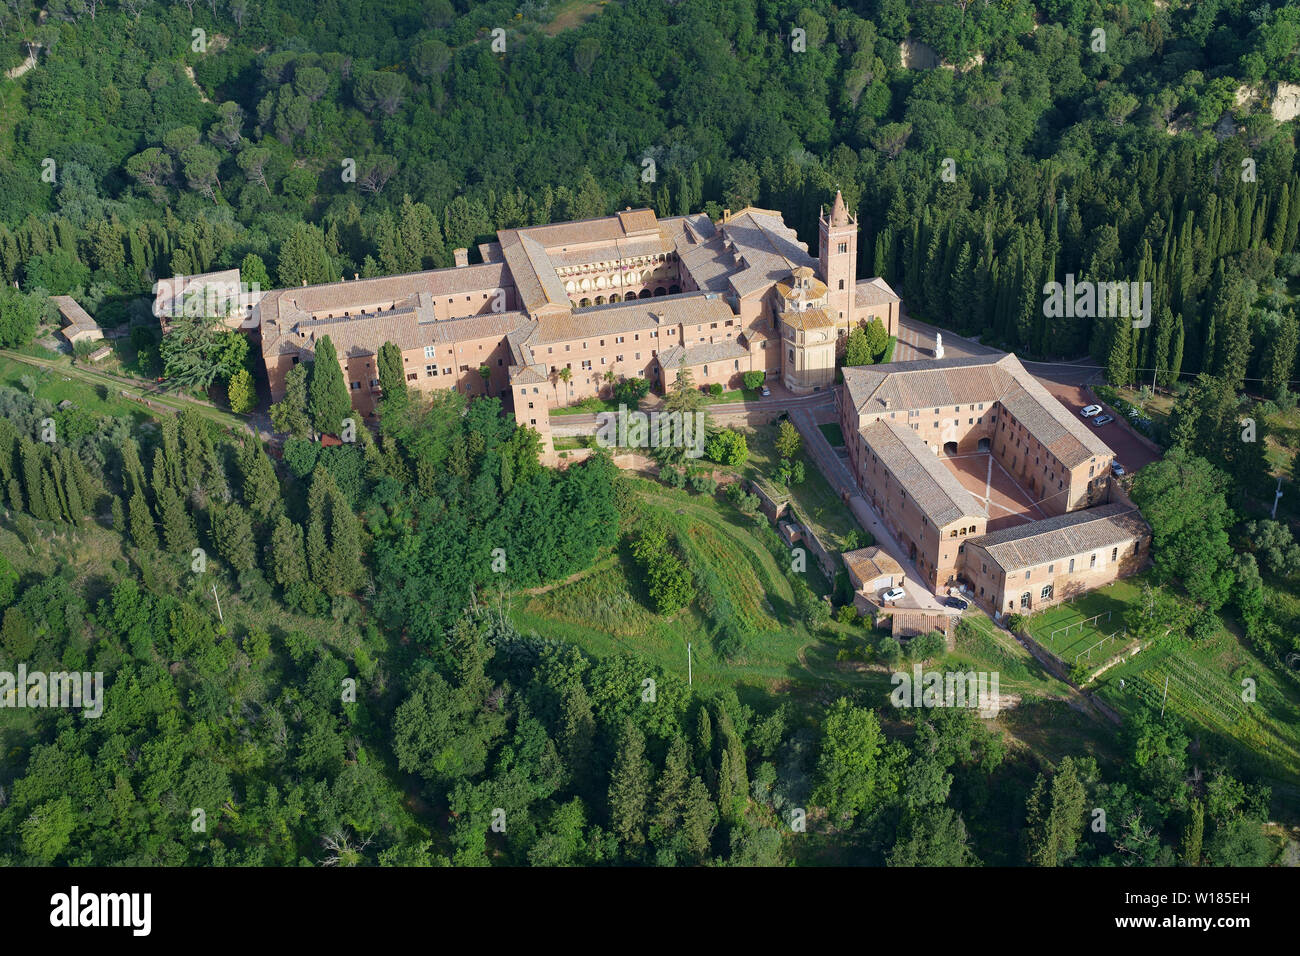 AERIAL VIEW. Secluded abbey in a setting of wooded hills. Monte Oliveto Maggiore abbey, Asciano, Province of Siena, Tuscany, Italy. Stock Photo